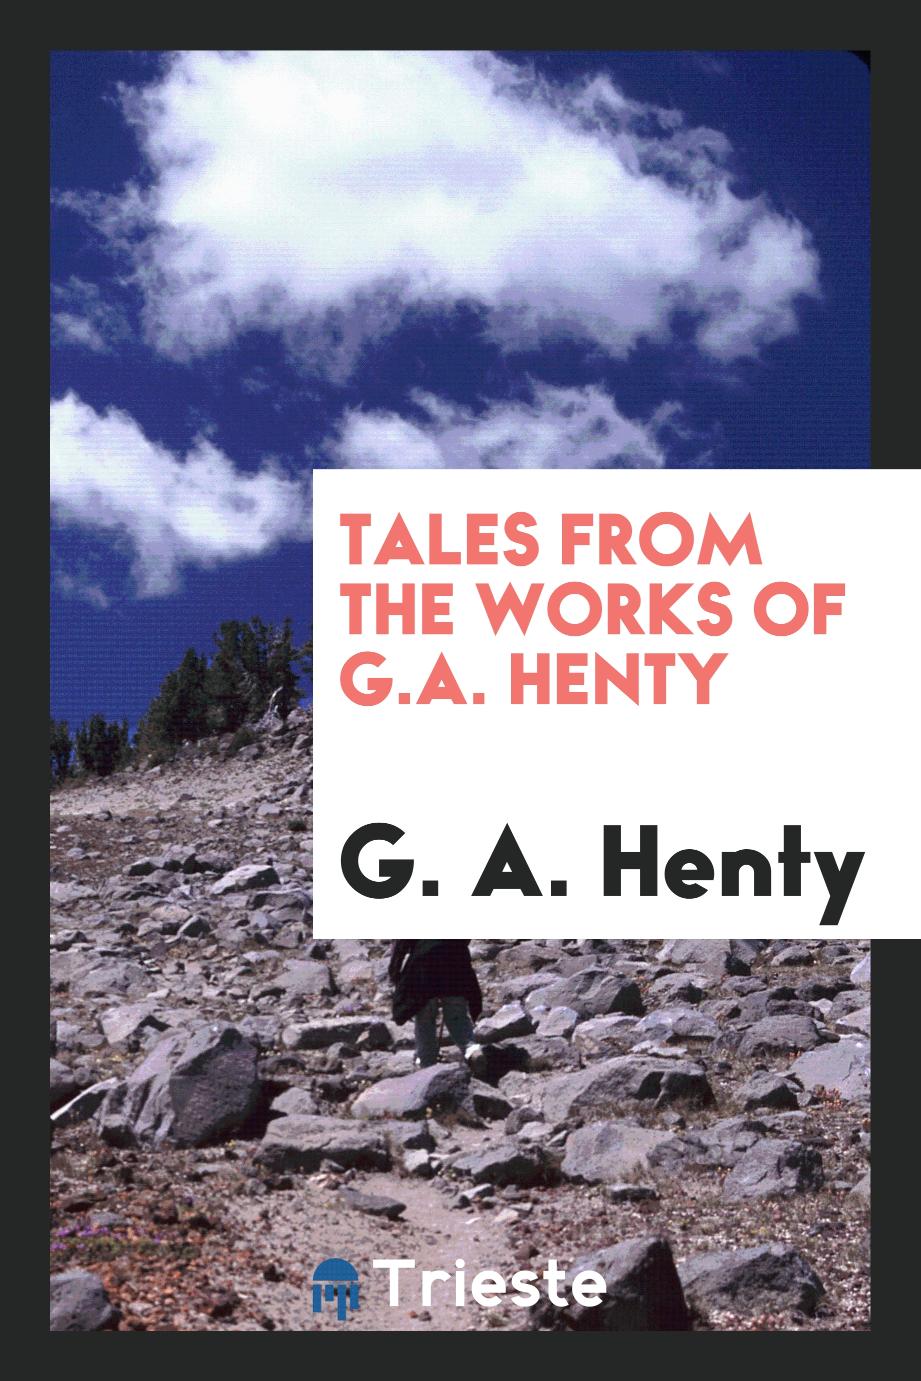 Tales from the works of G.A. Henty